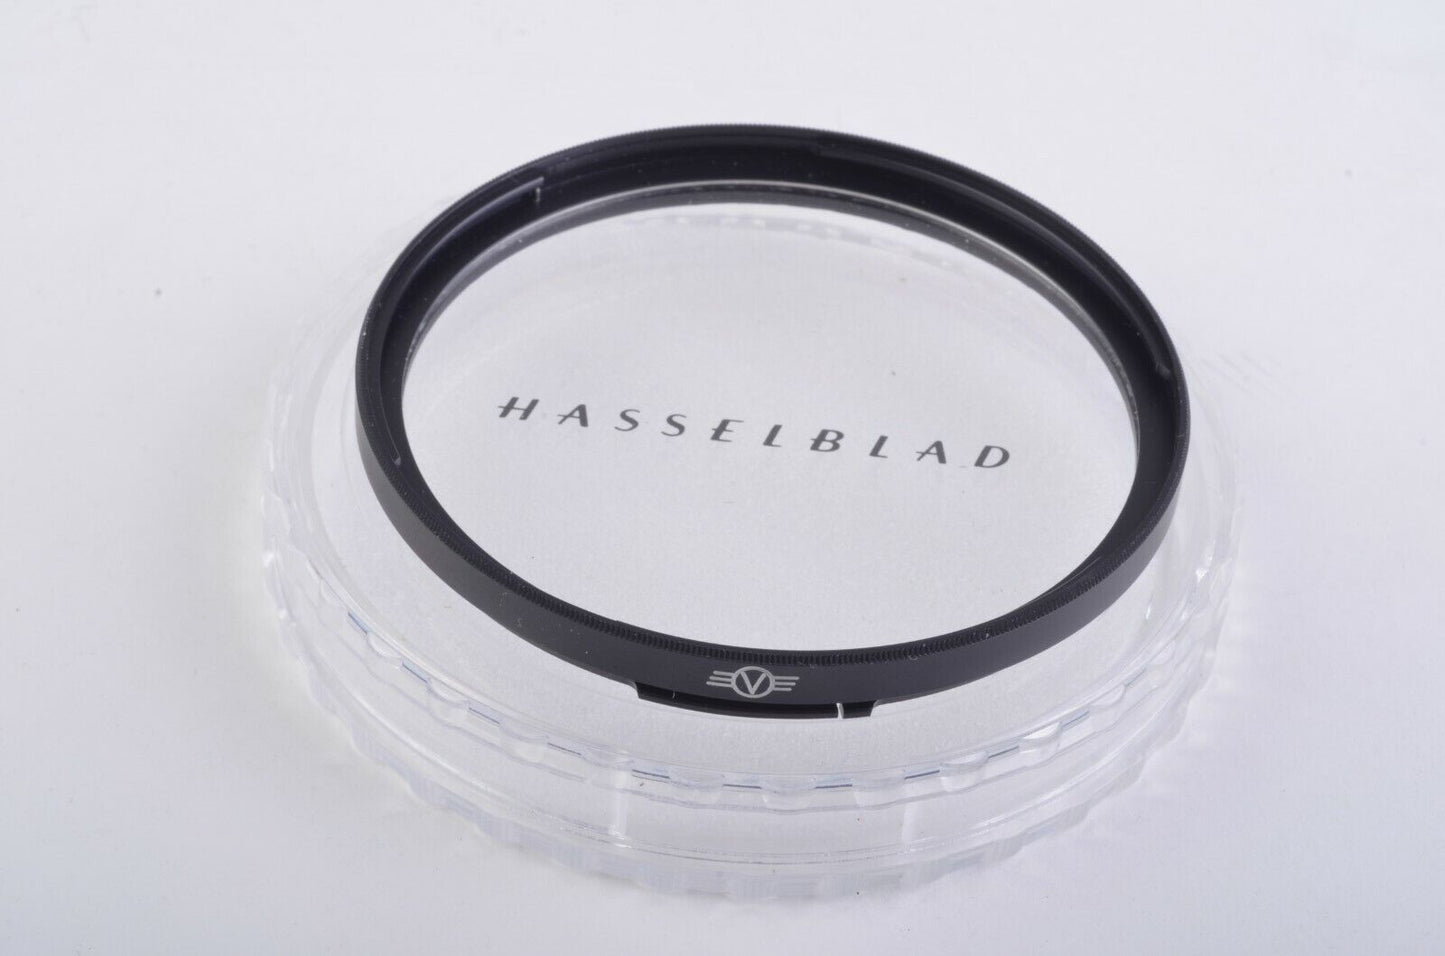 EXC+ HASSELBLAD CARL ZEISS B-77 SOFTAR 1 FILTER, SURFACE SCRATCHES, STILL GREAT